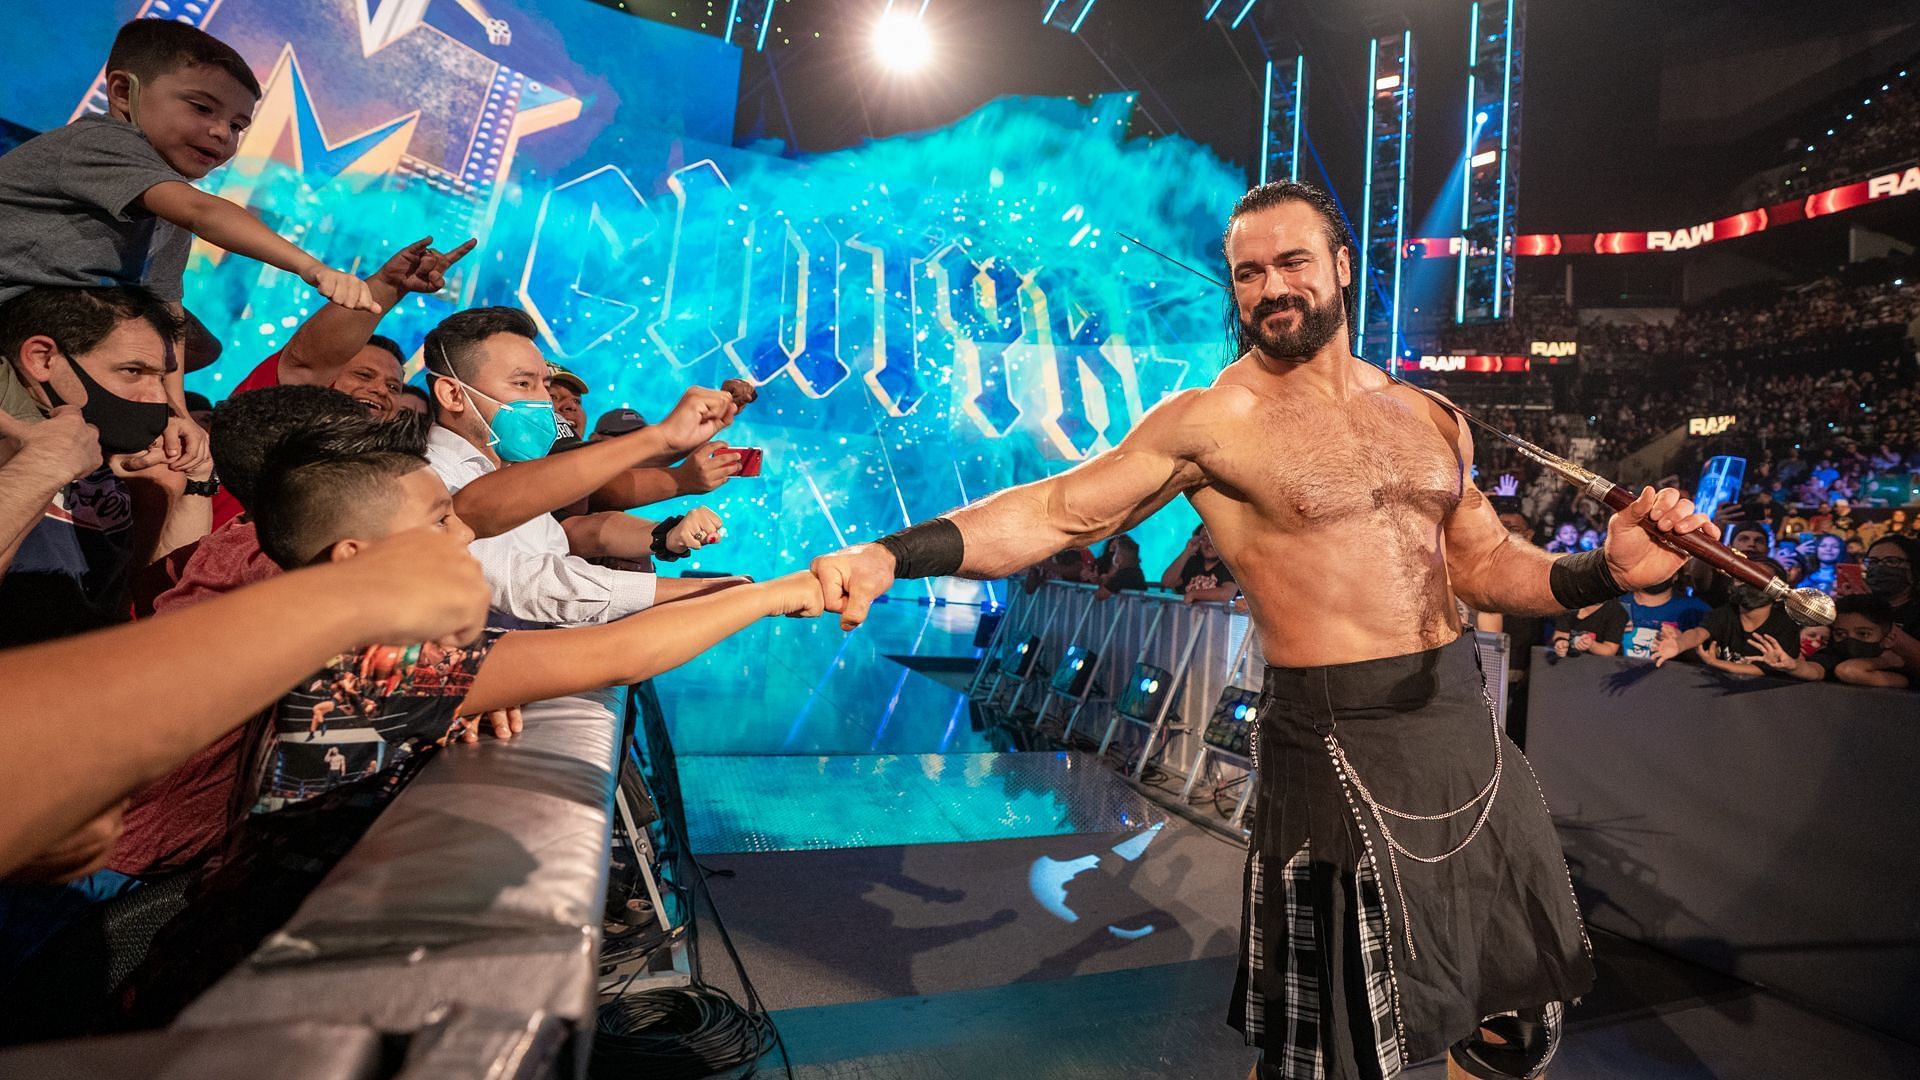 This upcoming week will be crucial for many, including Drew McIntyre